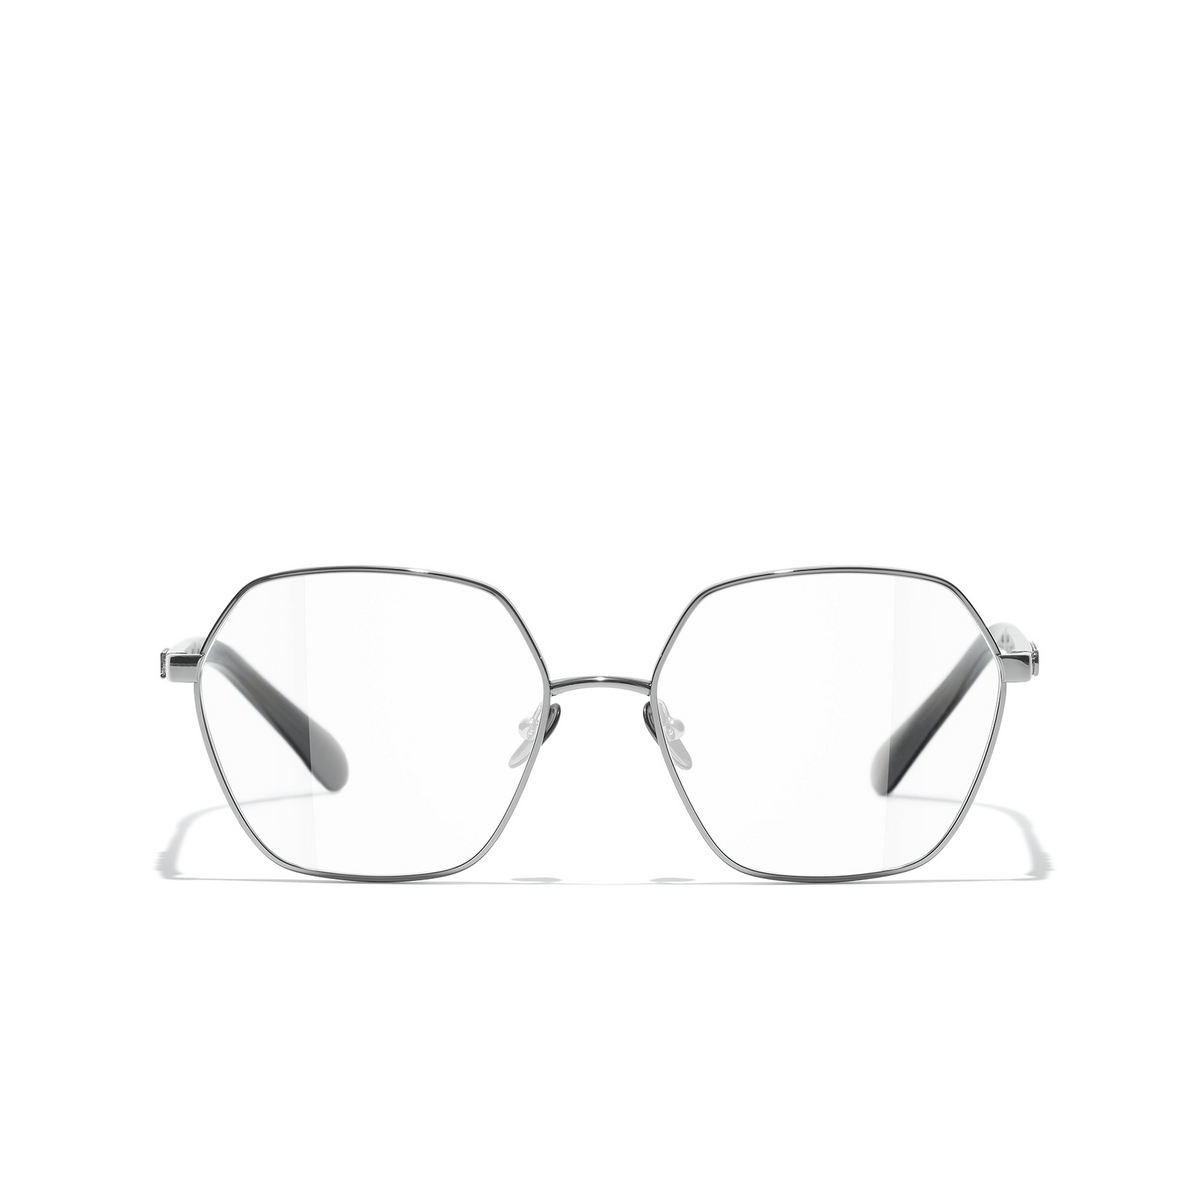 CHANEL square Eyeglasses C108 Dark Silver - front view